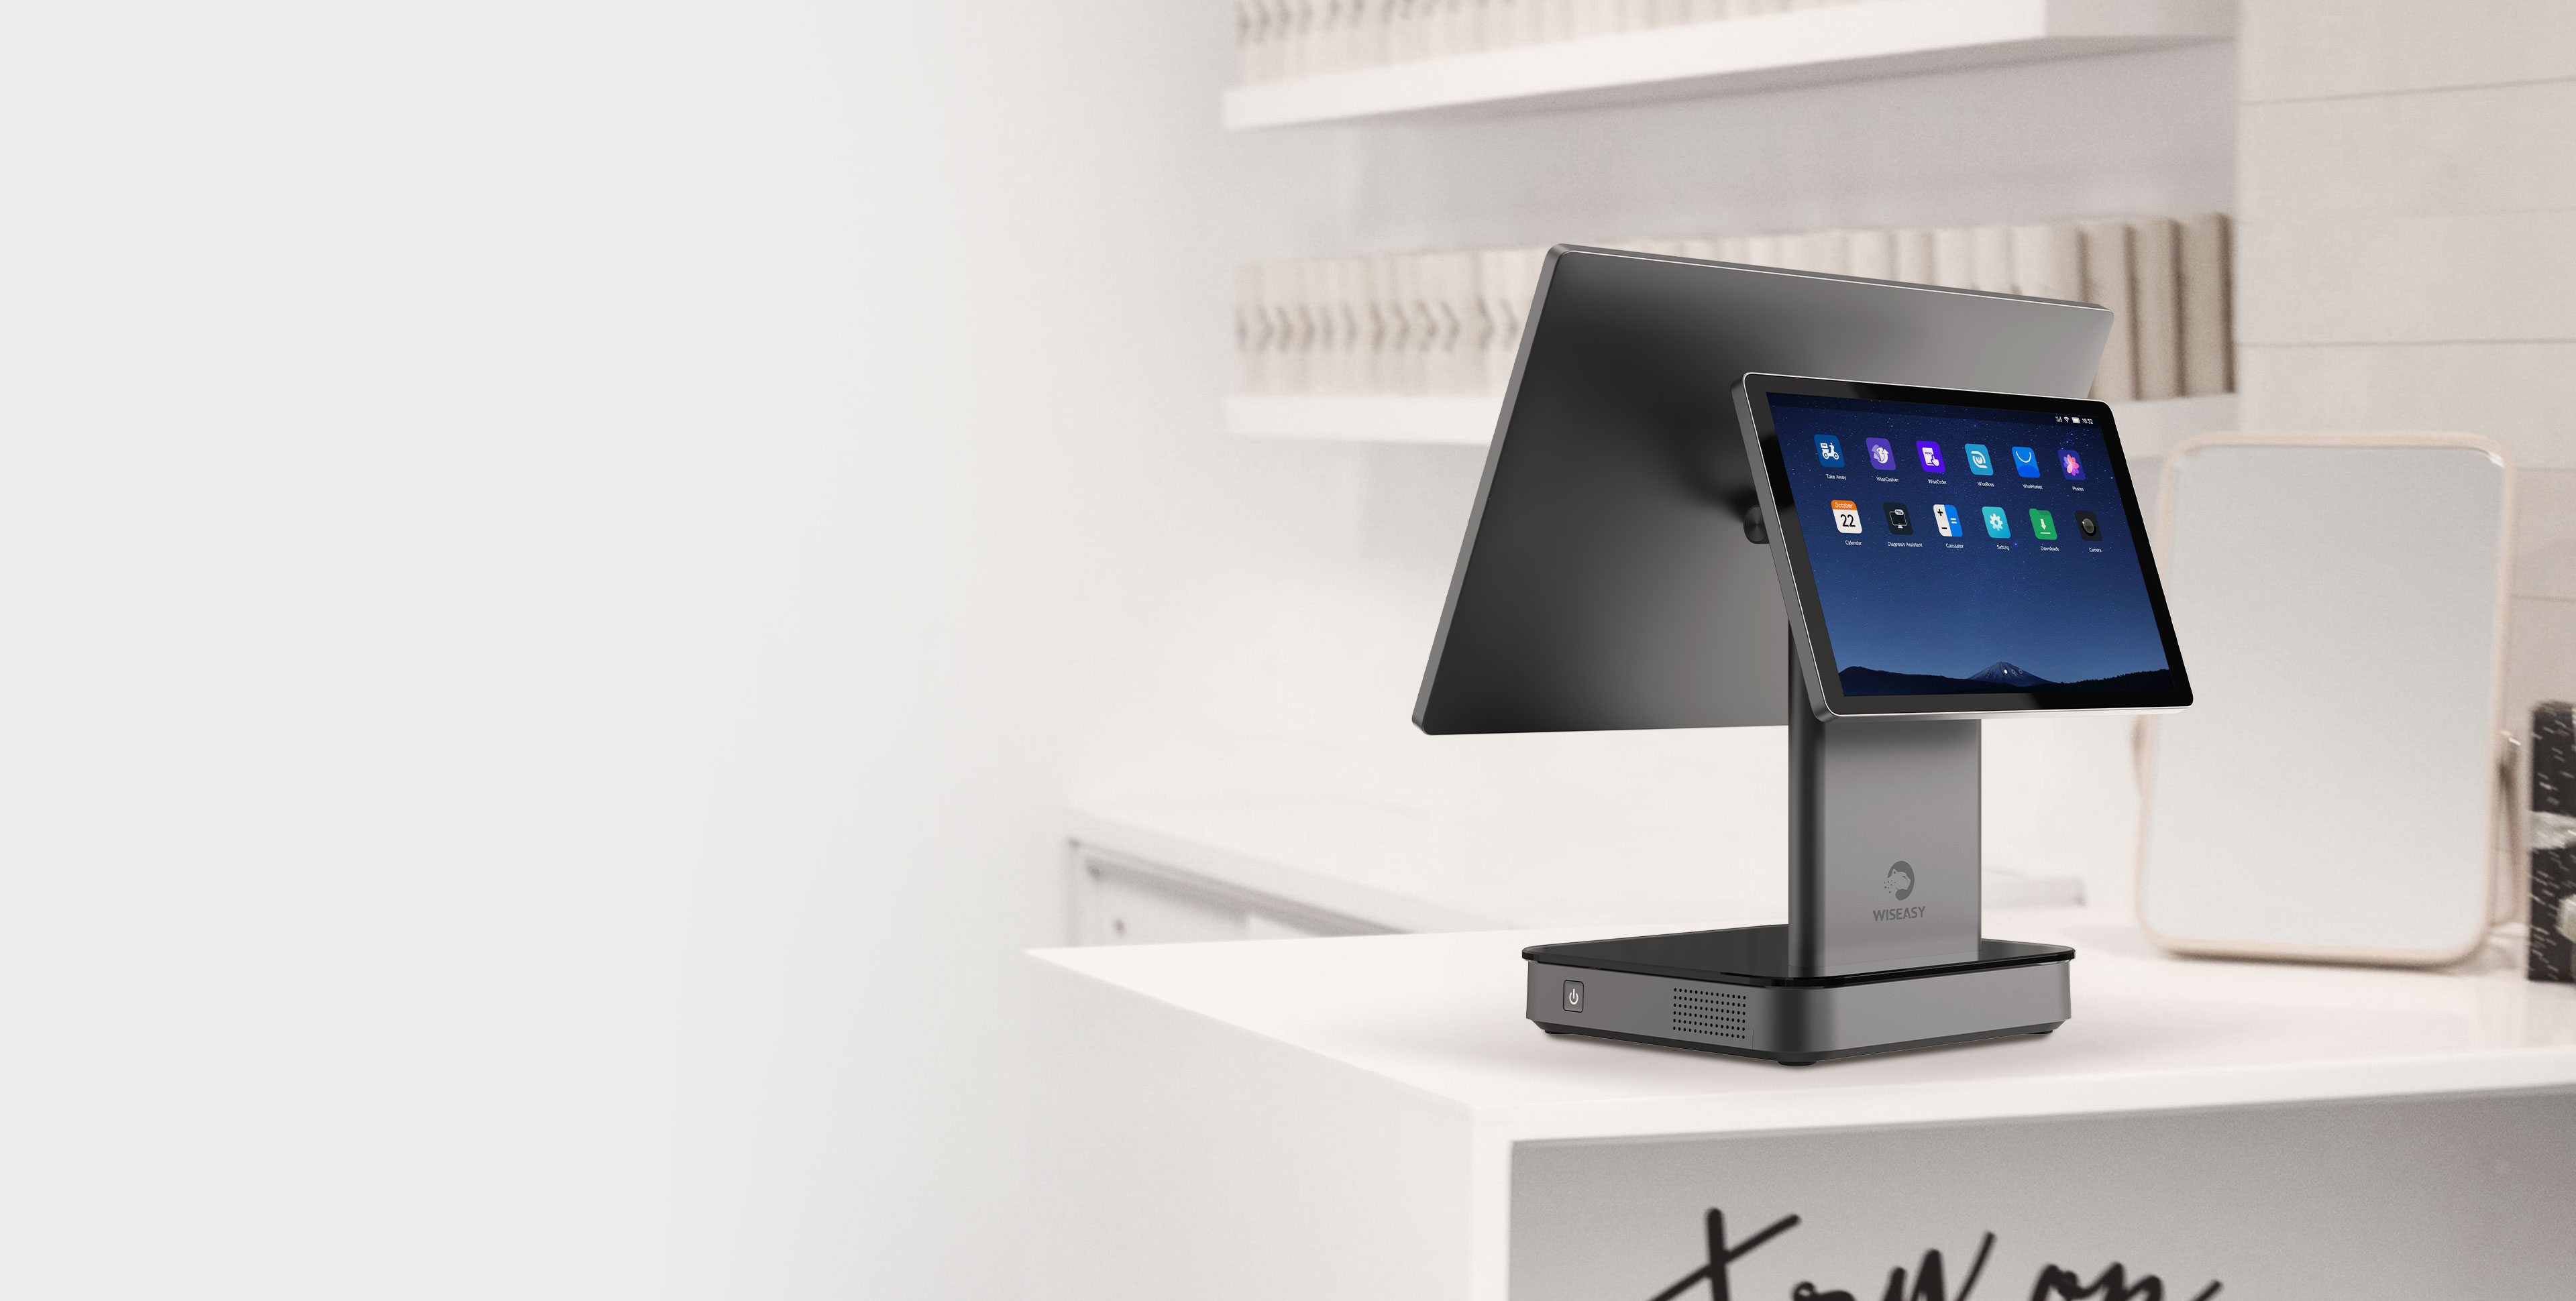 The Dual-screen SMARTPOS that delivers a streamlined checkout process